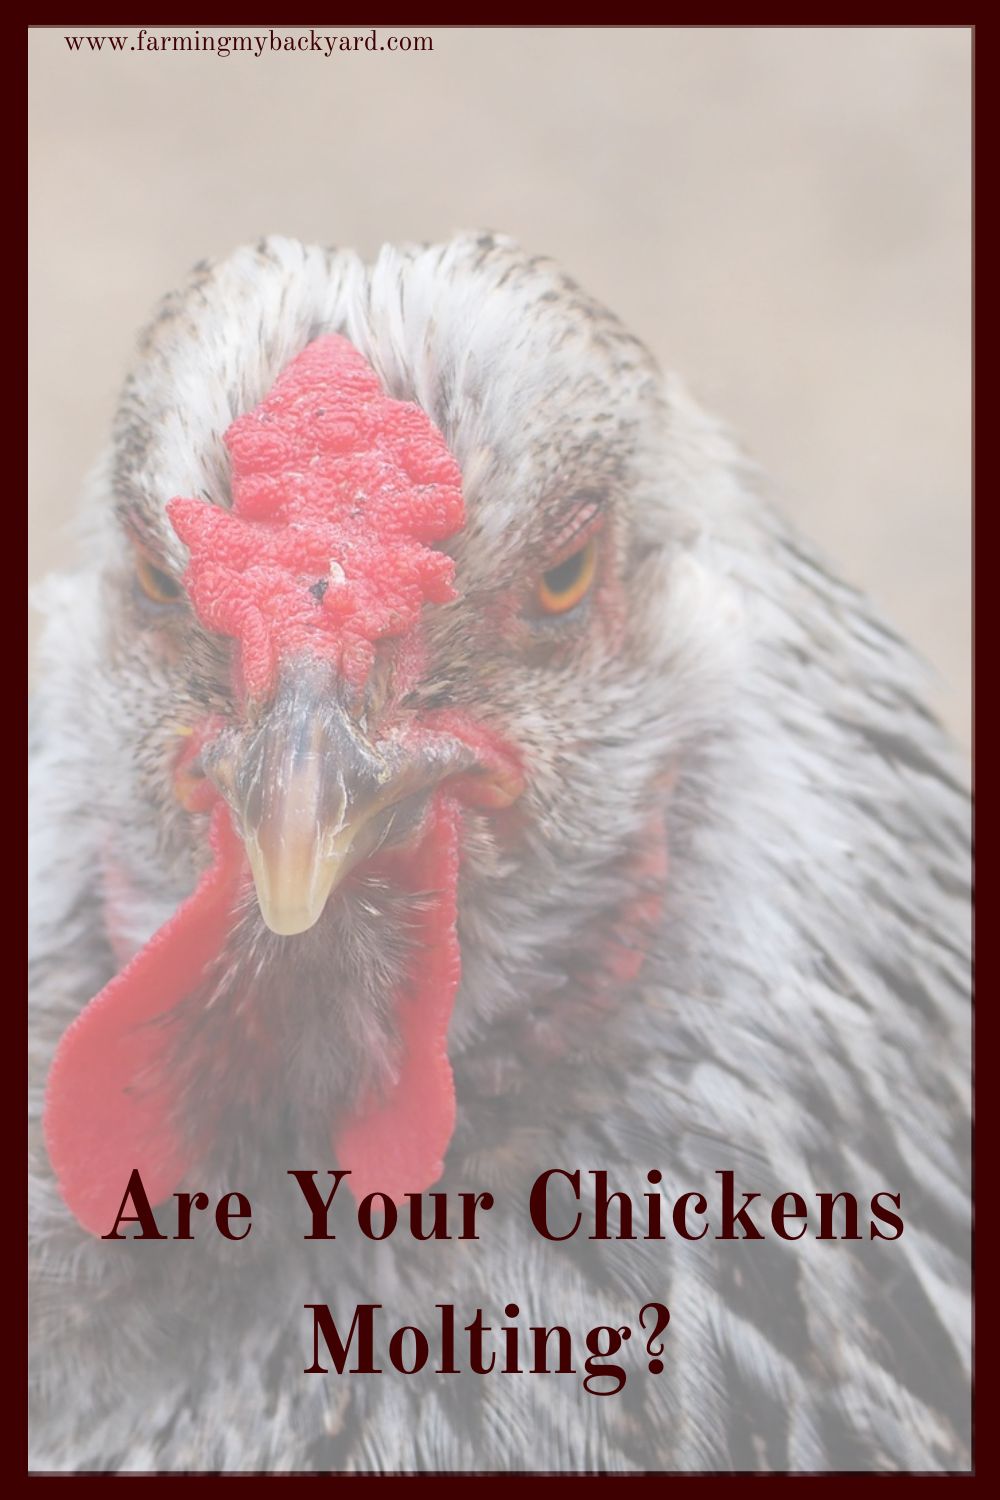 Chickens molting may look like a disaster, and cause a drop in egg production, but there are some things you can do to help them get through it.